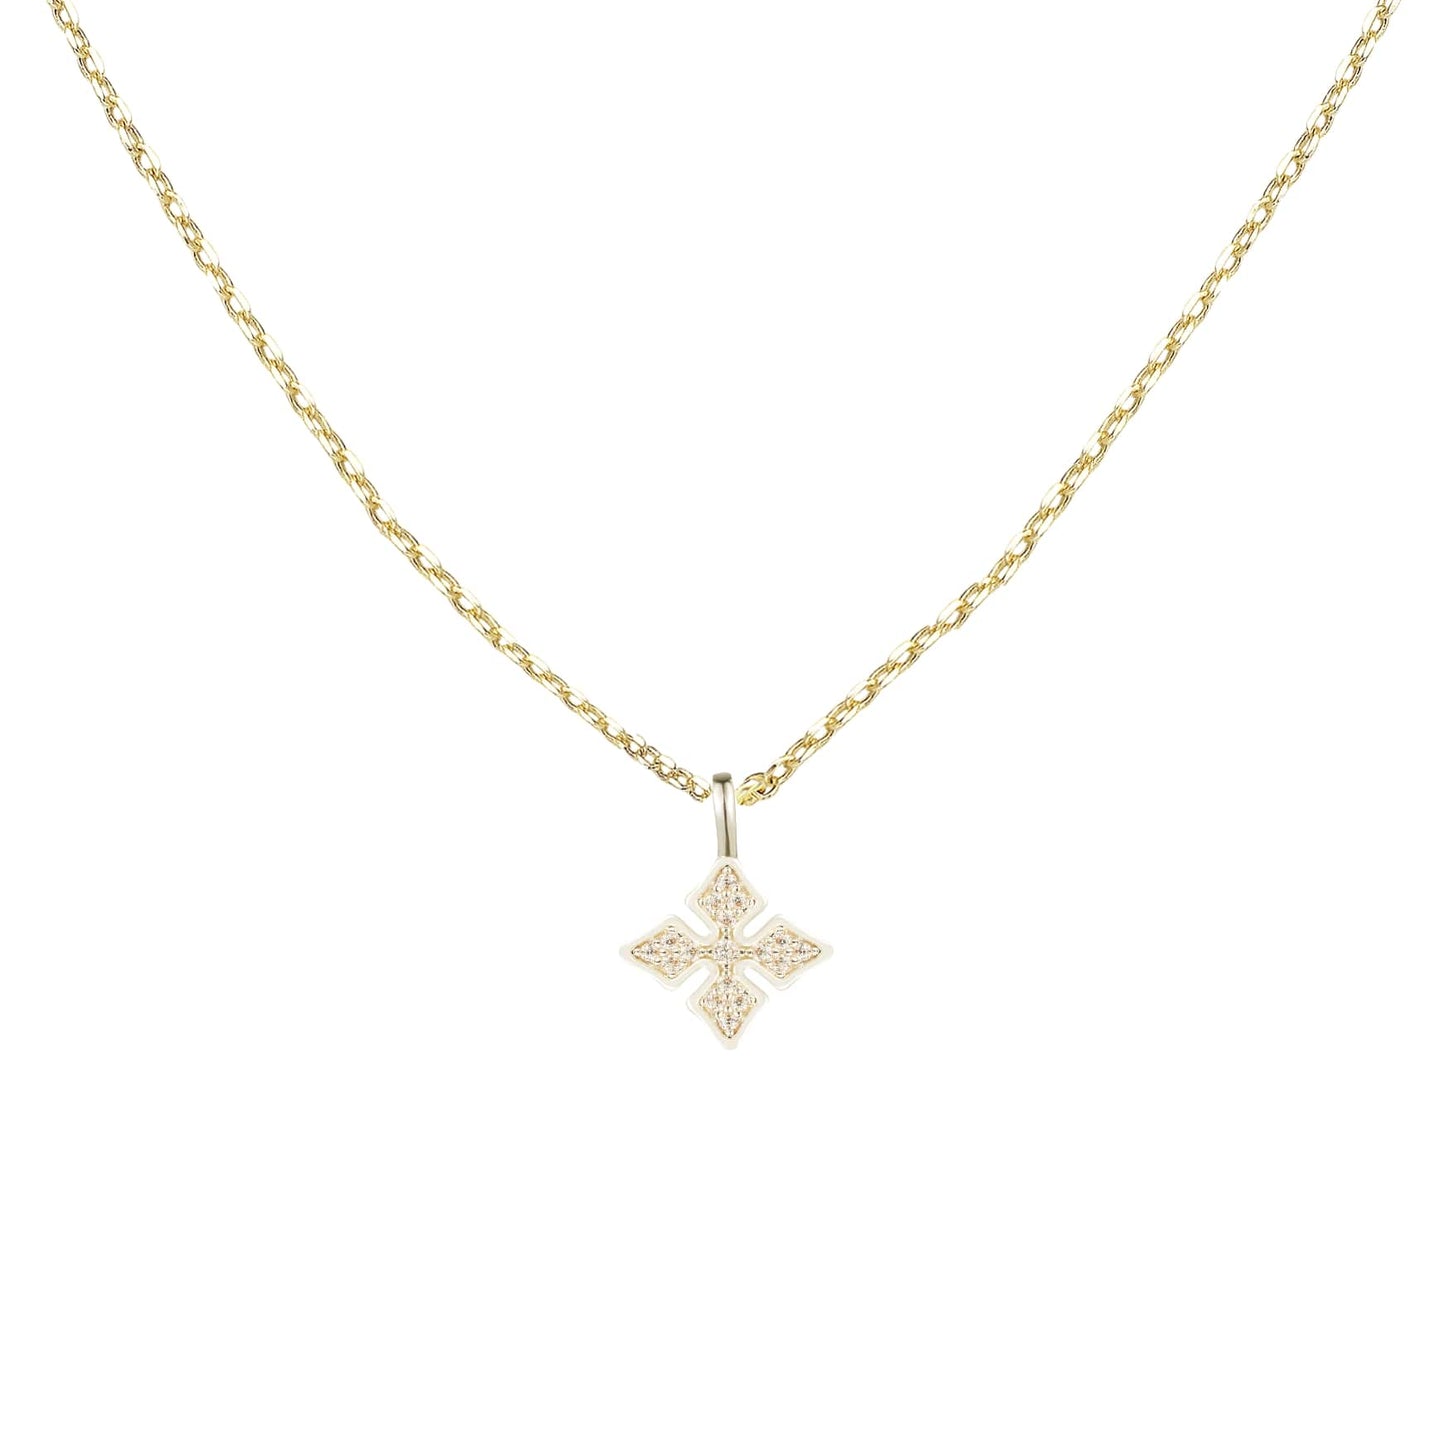 Natalie Wood Designs "Shine Bright" Cross Necklace-Gold